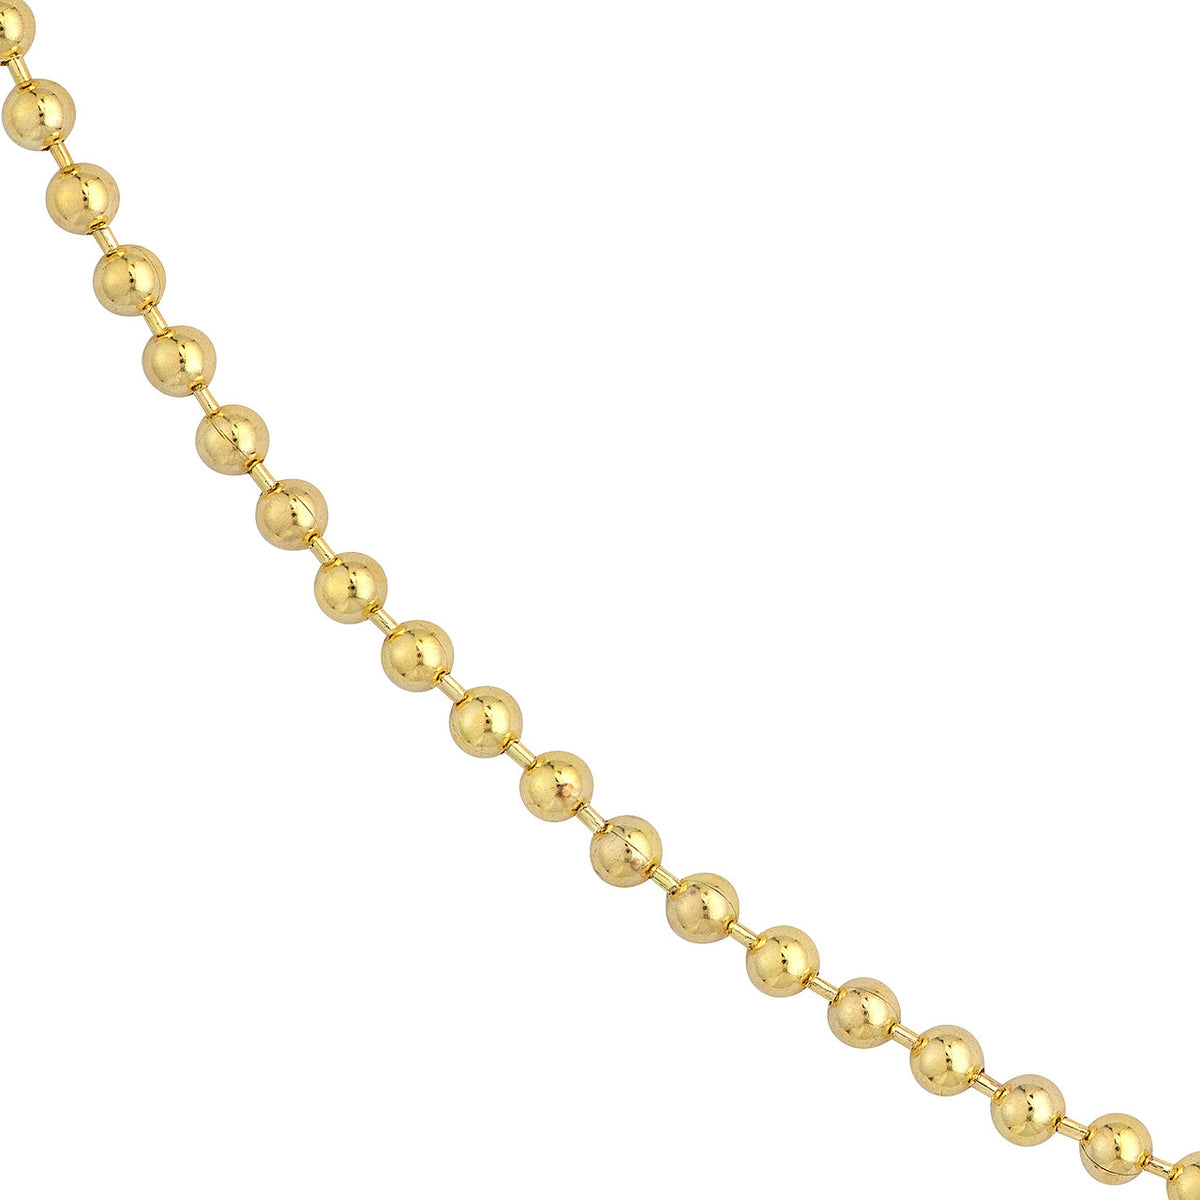 14K Gold 3mm Bead Chain Necklace with Lobster Lock